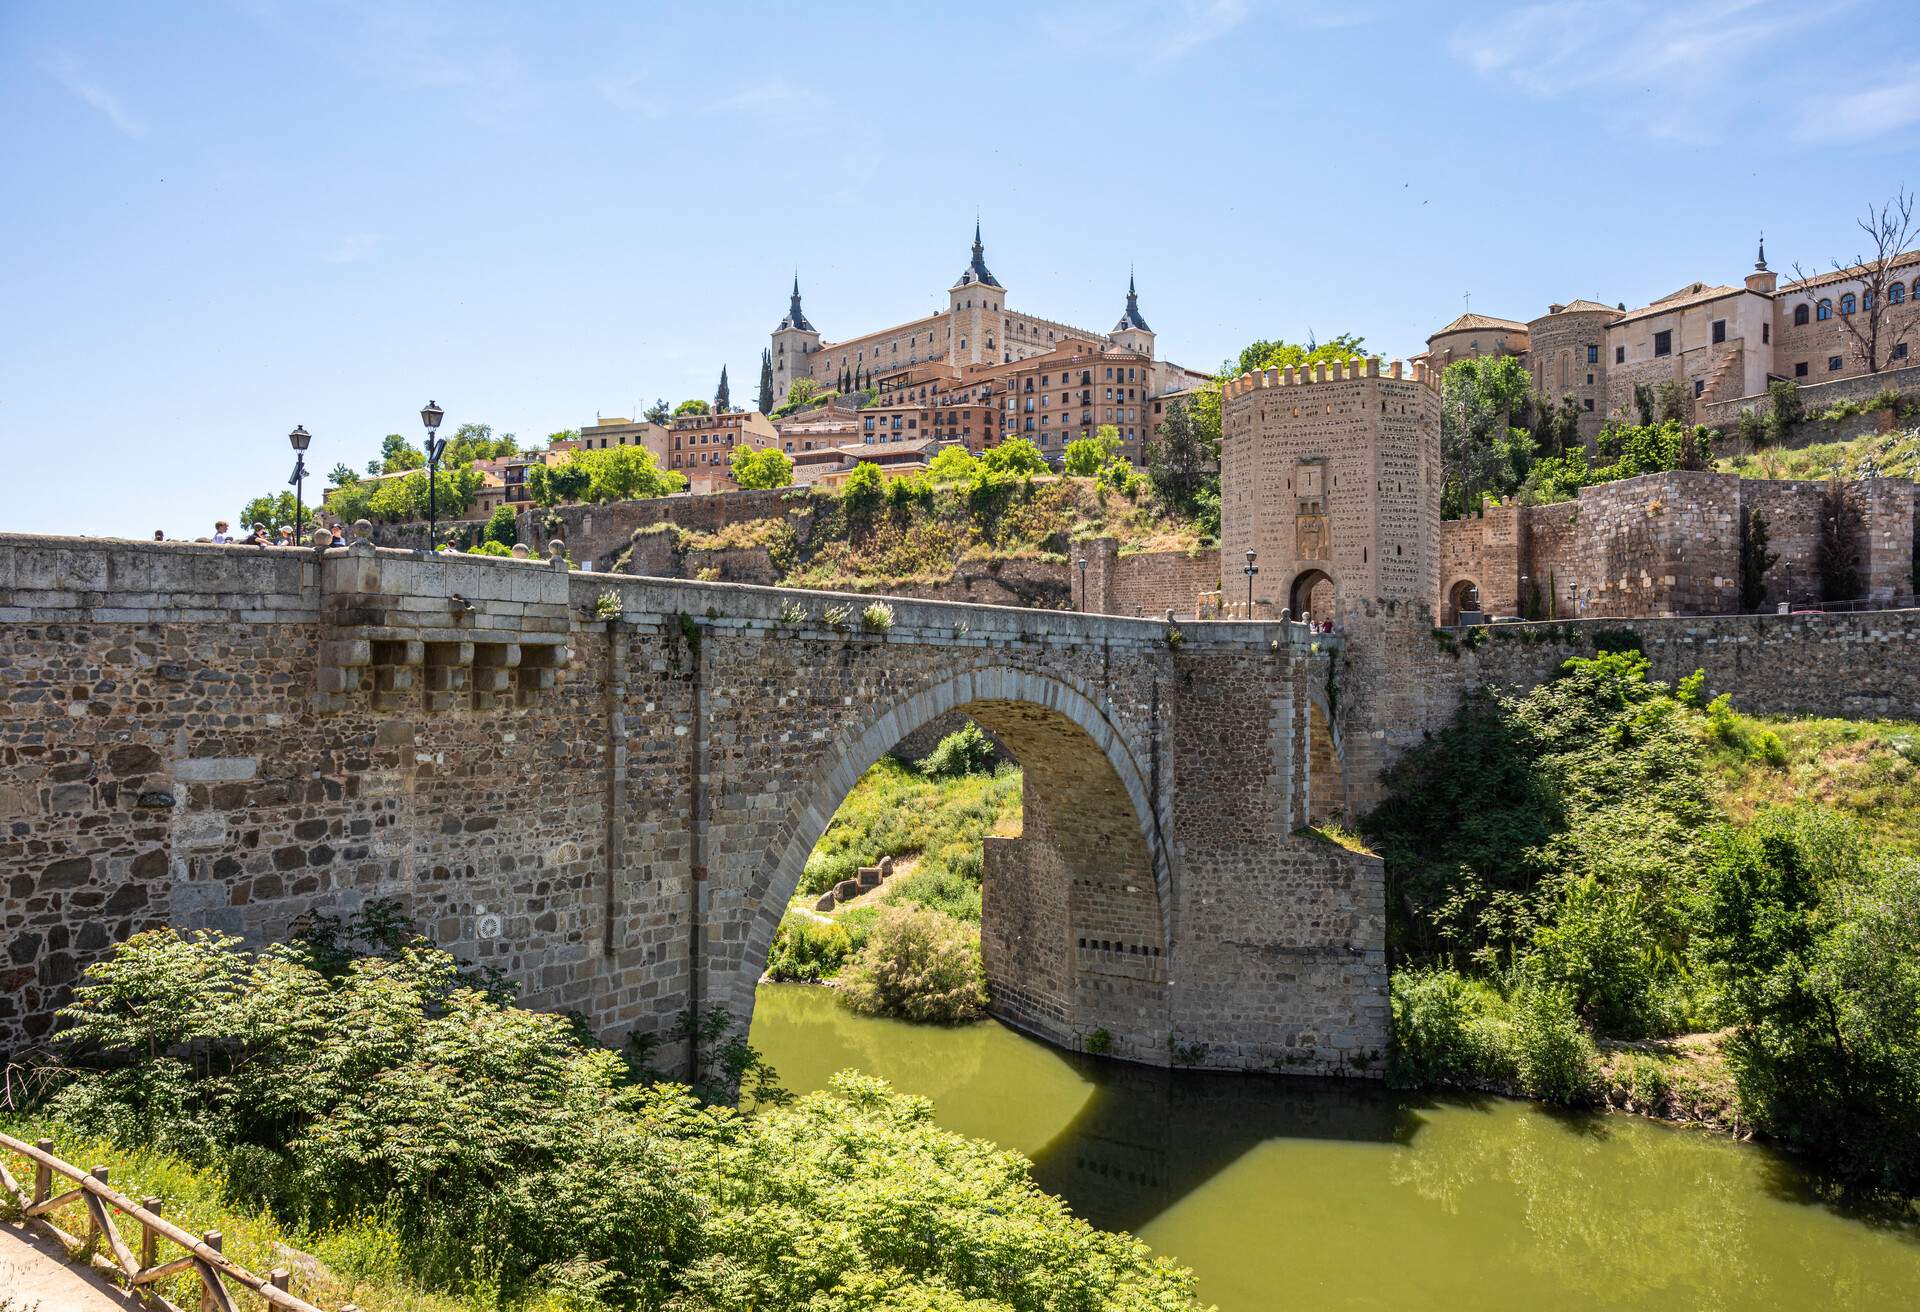 A view of Alcantara bridge over the river Tagus with the town Toledo on the other side of the bridge. The stone arch bridge was built over the Tagus River between 104 and 106 AD by an order of the Roman emperor Trajan.